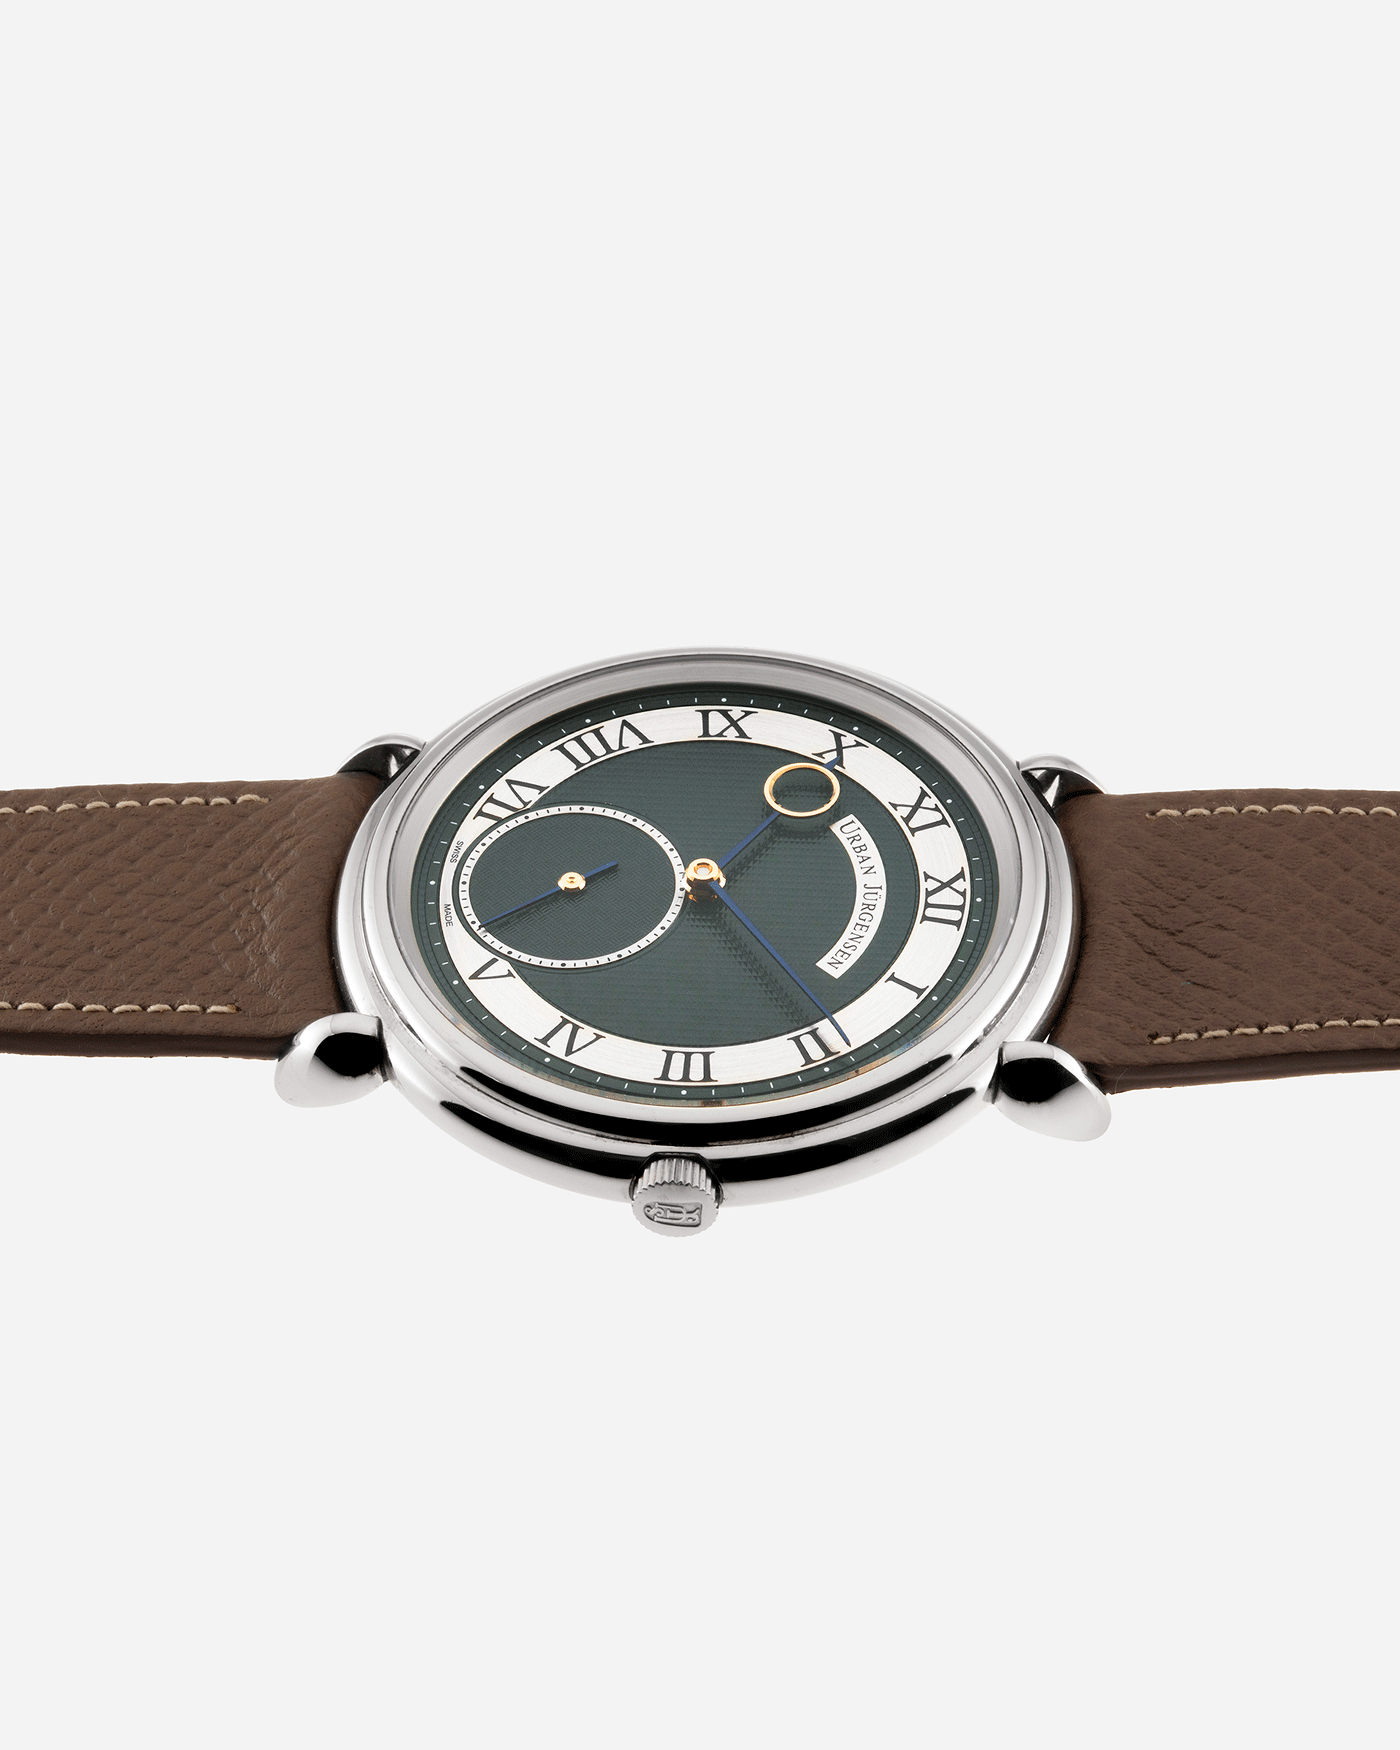 Brand: Urban Jurgensen Year: 2020 Model: Big 8 London Edition Material: Stainless Steel Movement: Frederic Piguet cal. 1160 Case Diameter: 40mm Strap: Nostime Taupe Grained Calf and Grey Suede Strap by A Collected Man and Stainless Steel Urban Jurgensen Tang Buckle